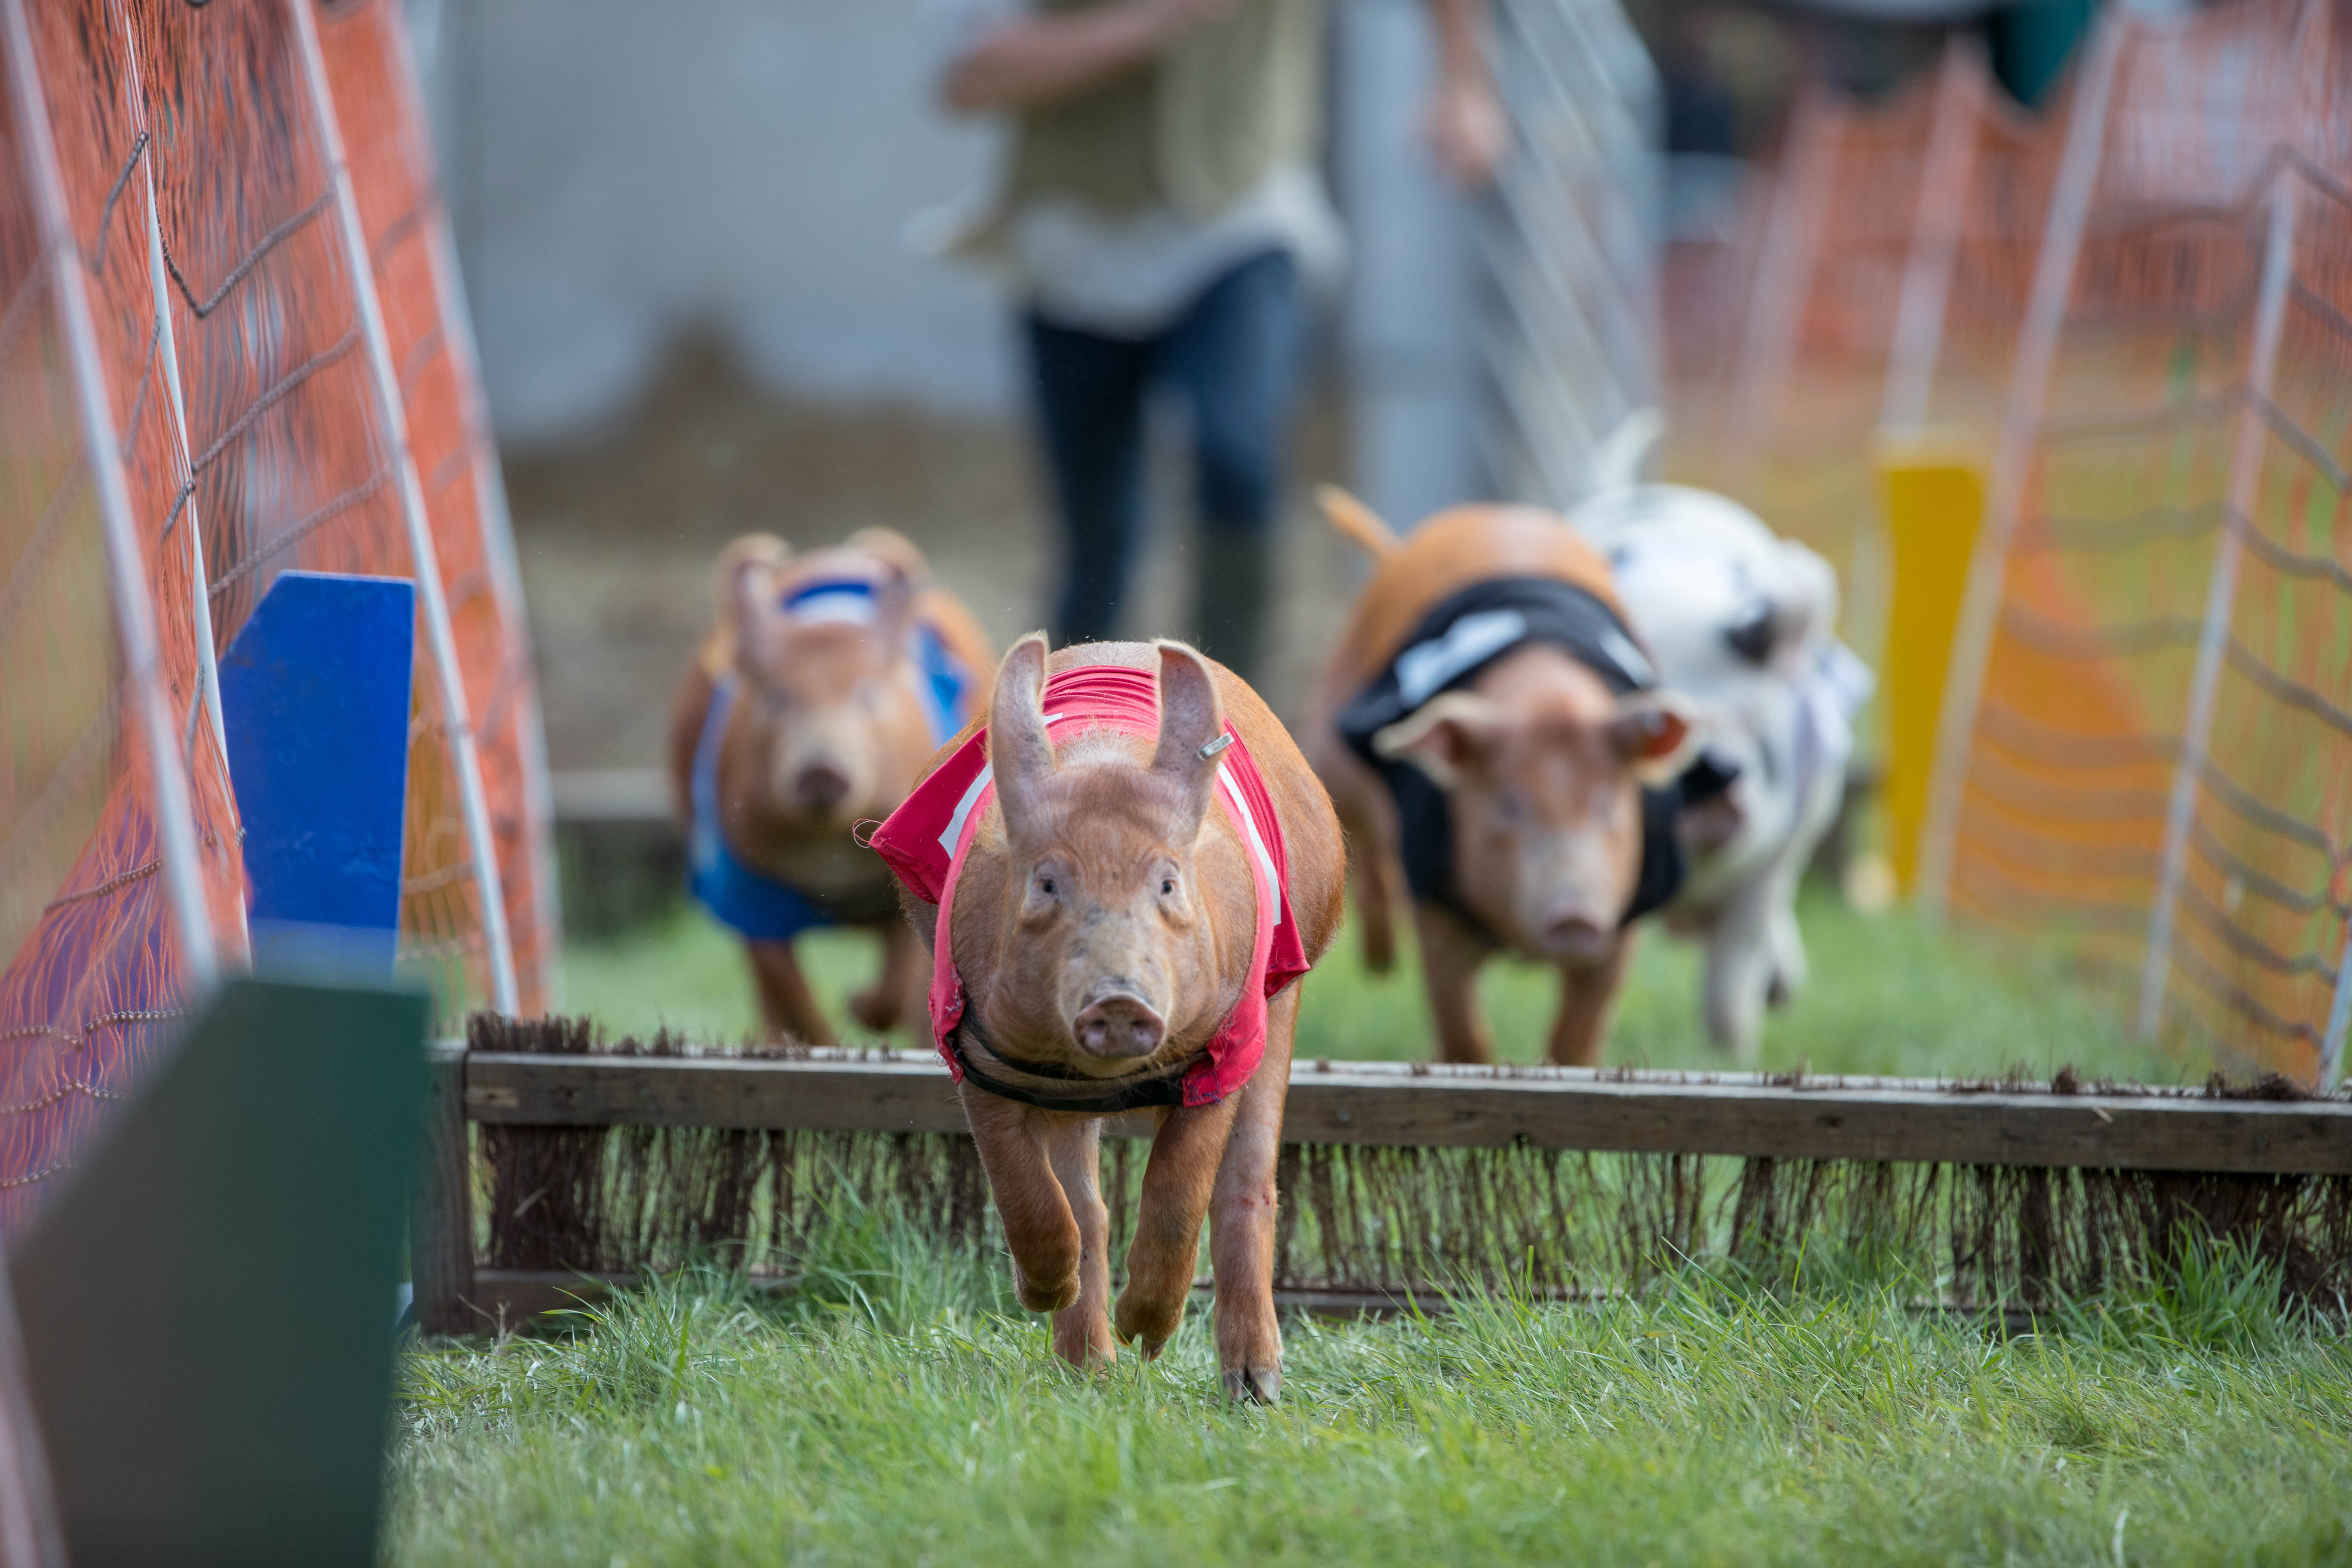 Pig racing in full flow at Blair Castle International Horse Trails.